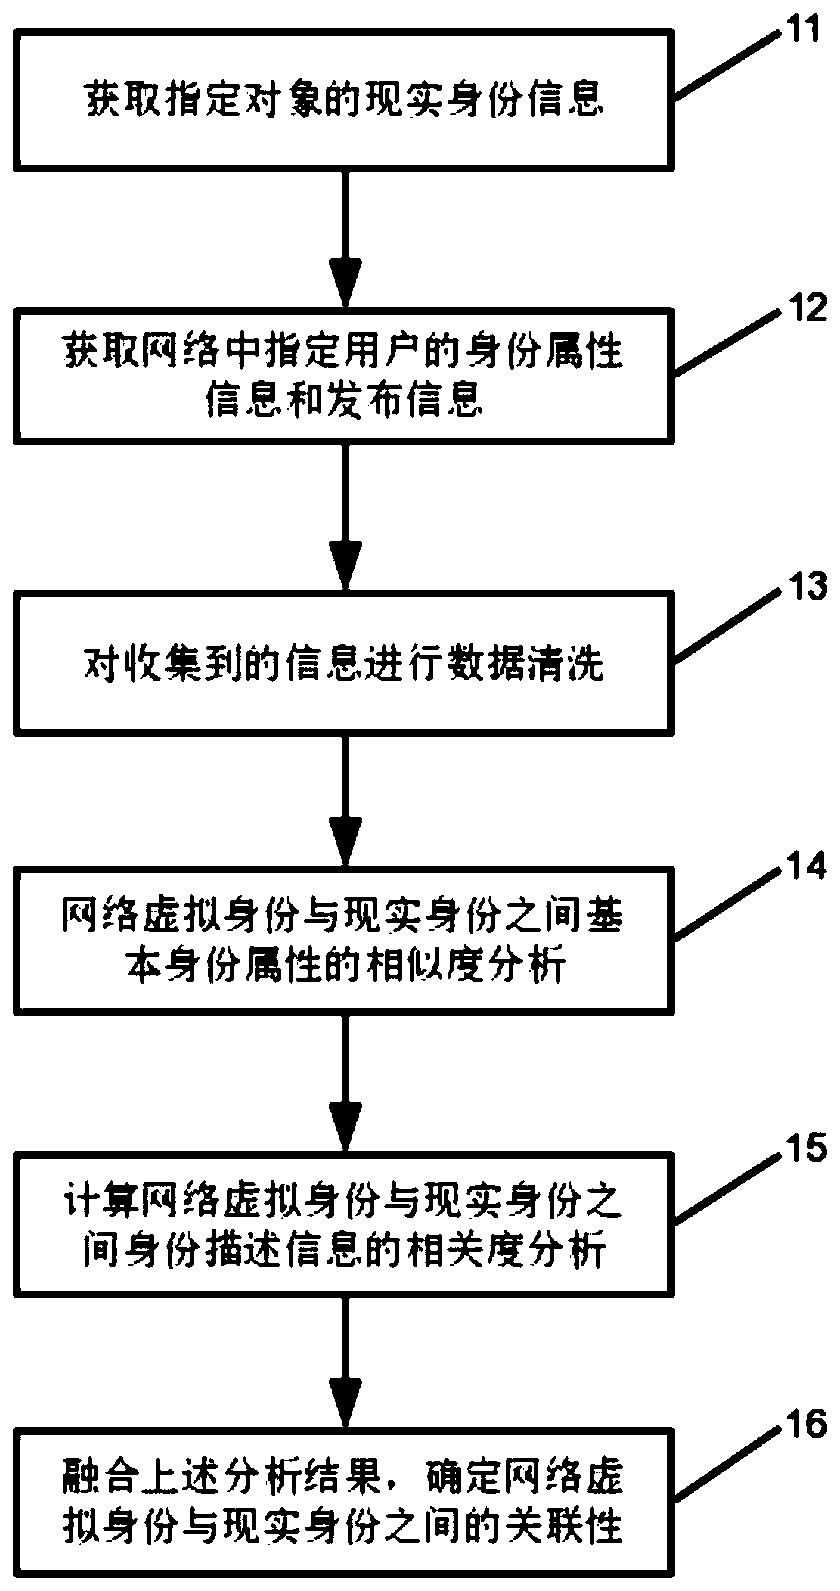 Network user identity recognition method